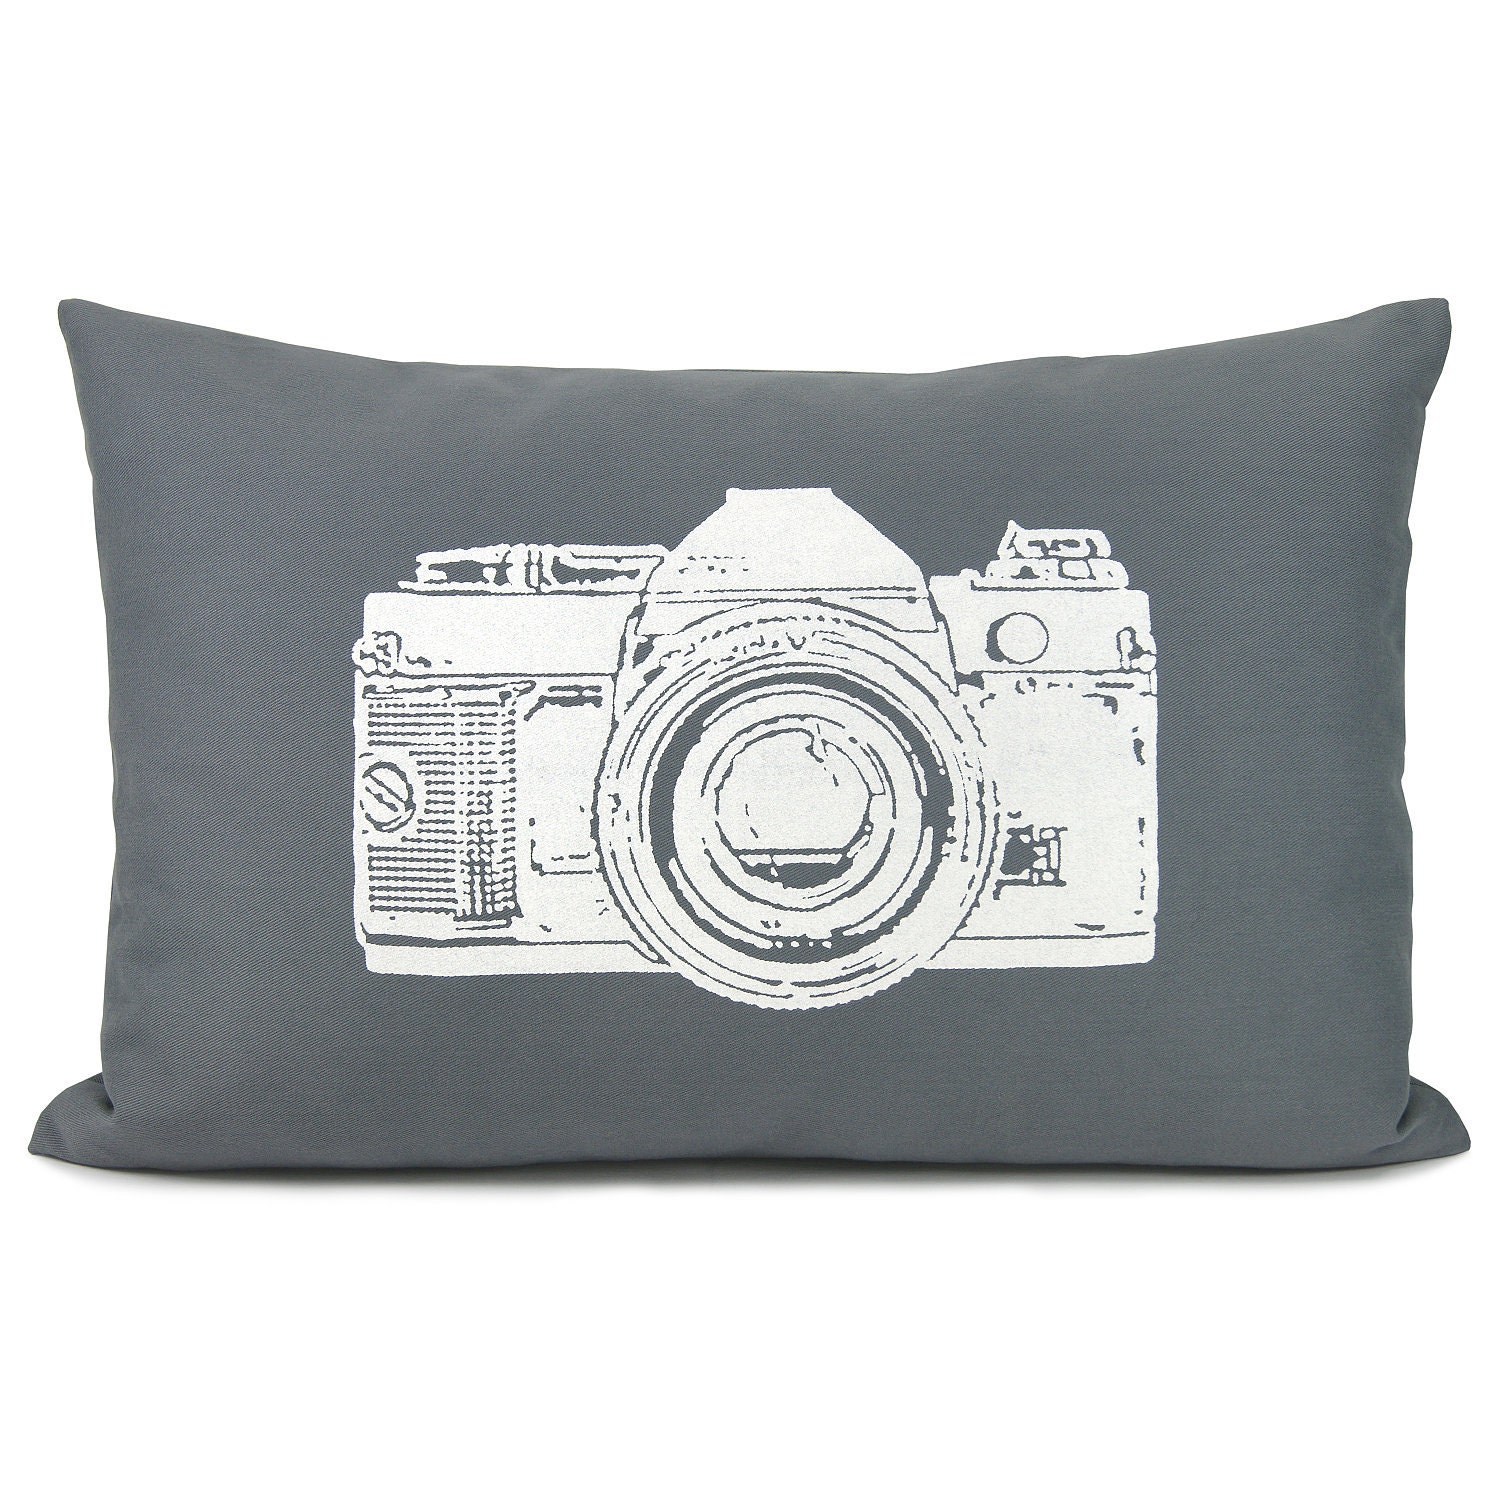 Gray and white decorative pillow cover - White vintage camera print on grey cotton fabric throw pillow case - 12x18 lumbar pillow cover